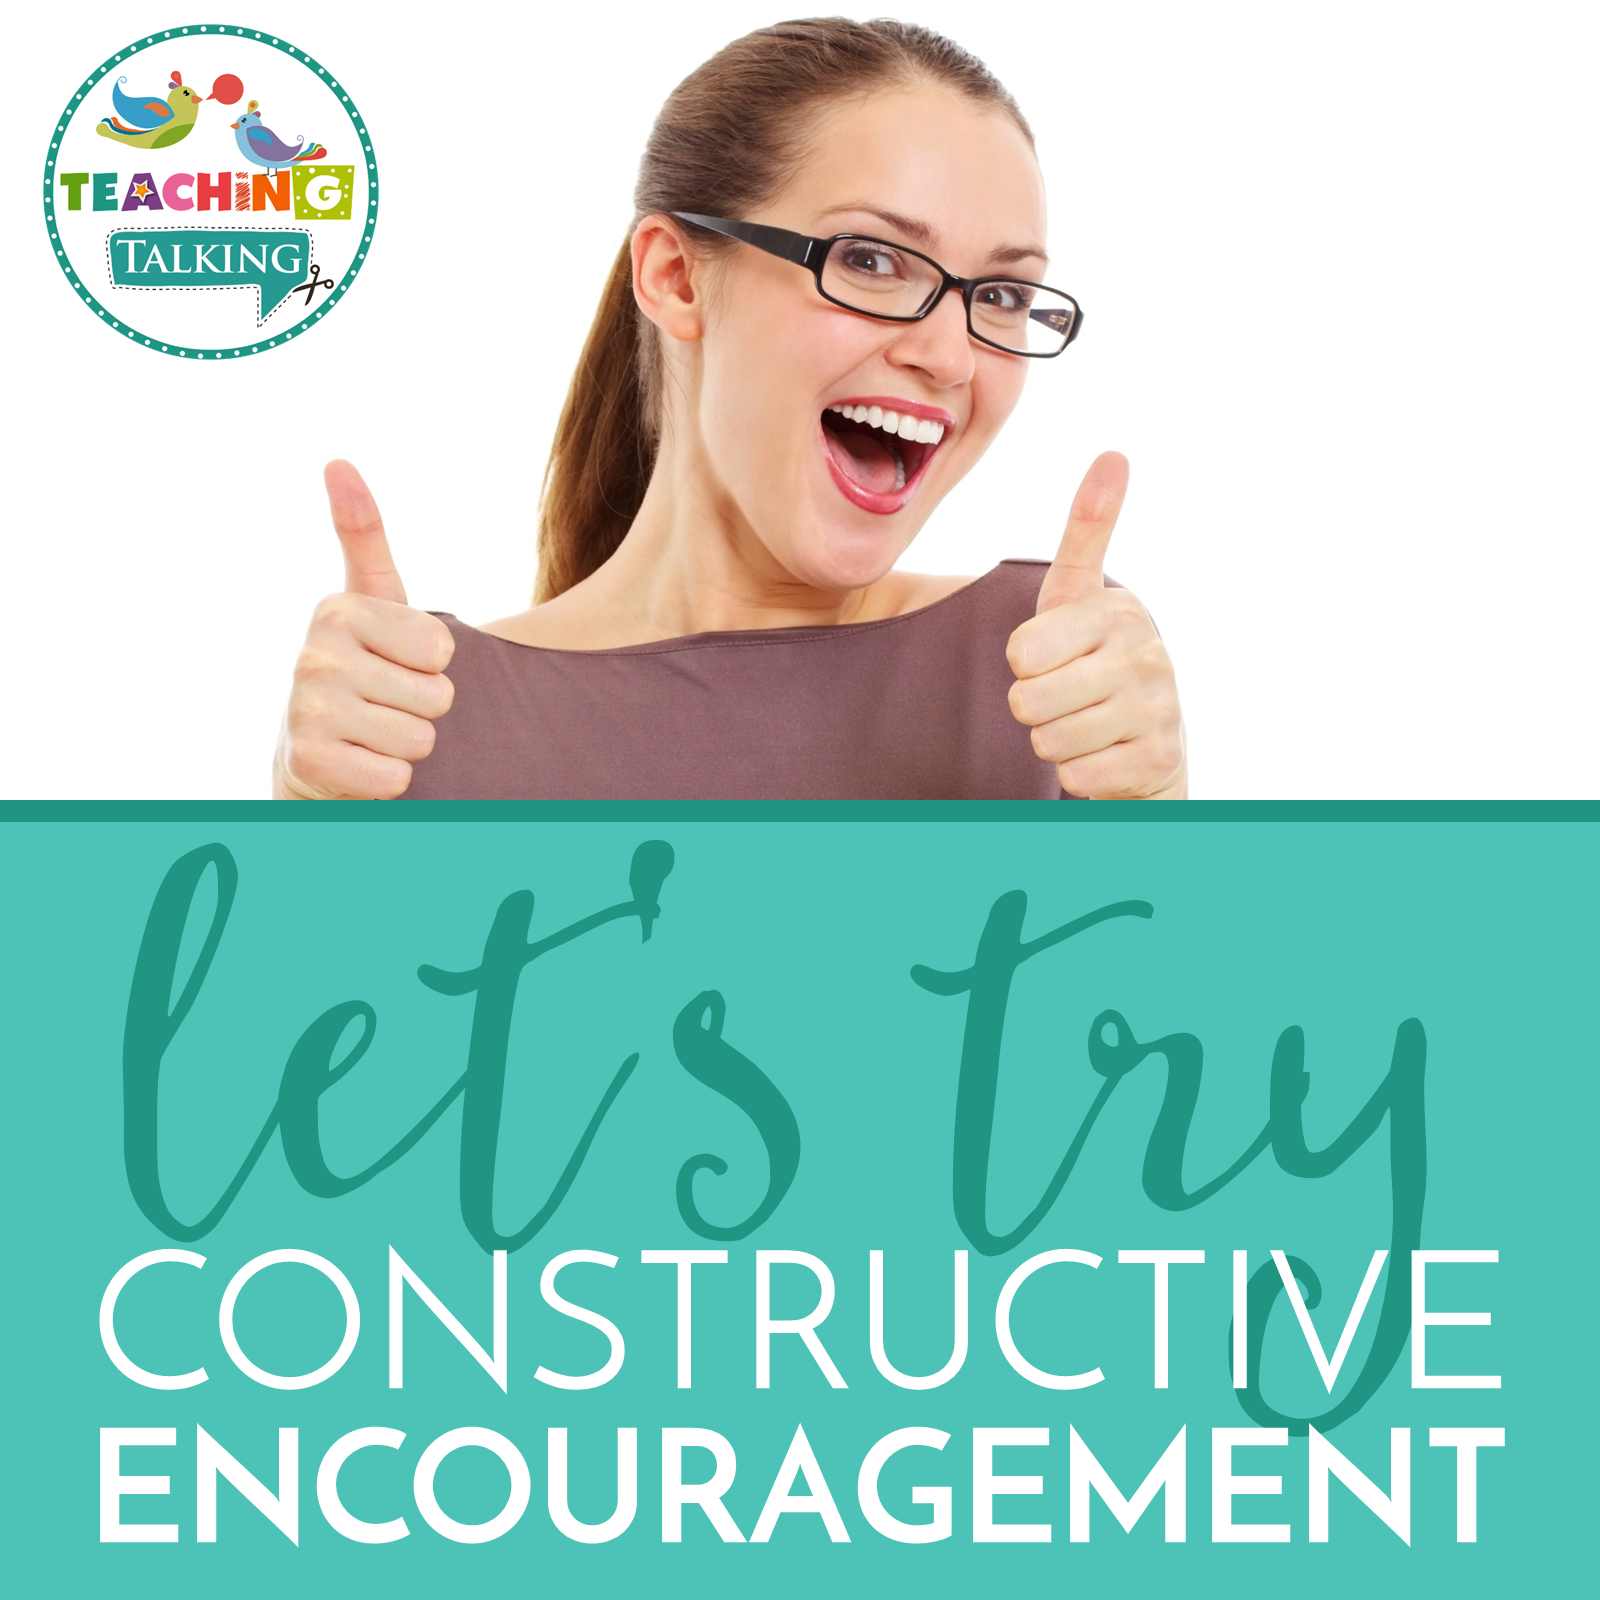 Enough with “Speech Shaming”, let’s try “Constructive Encouragement” Instead!